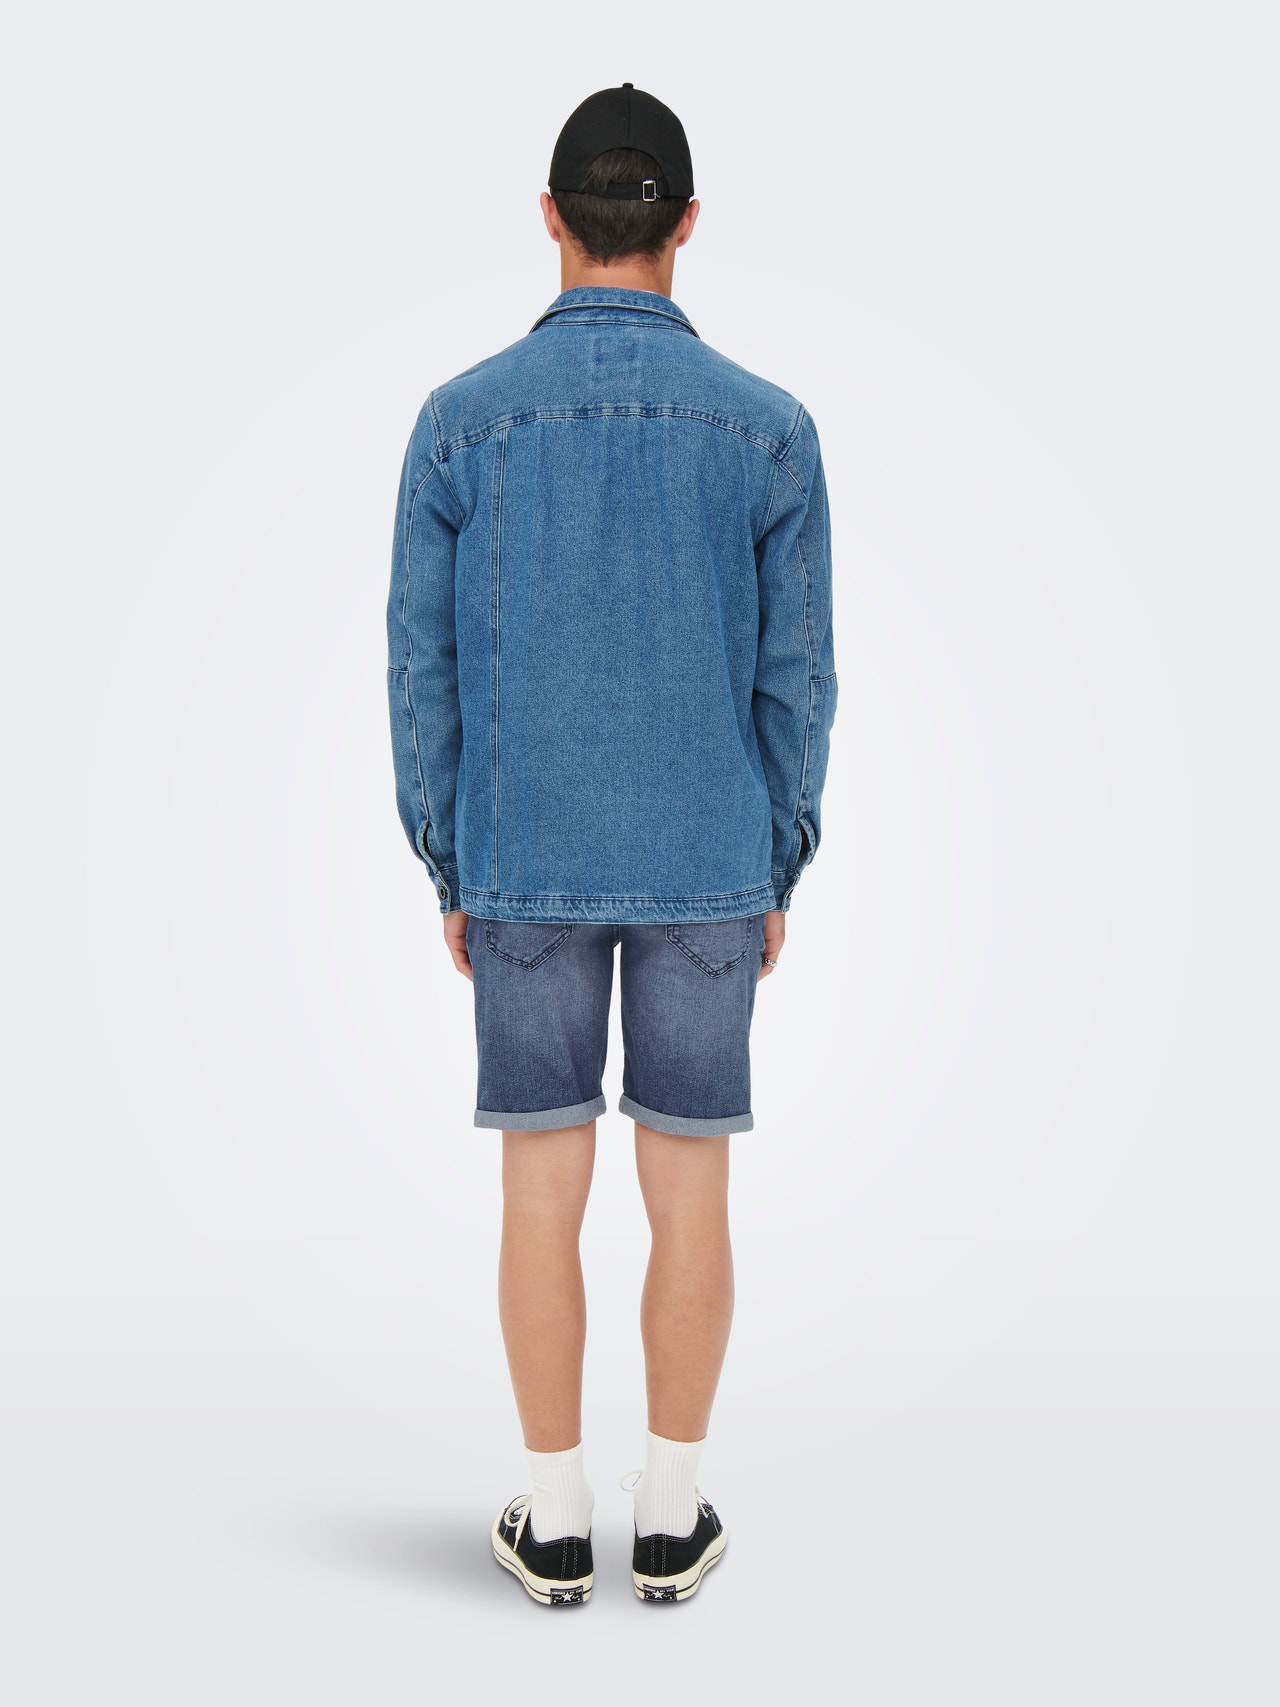 ONLY & SONS ONSPLY SHORTS BLUE PK 0754 -Blue Denim - 22020754